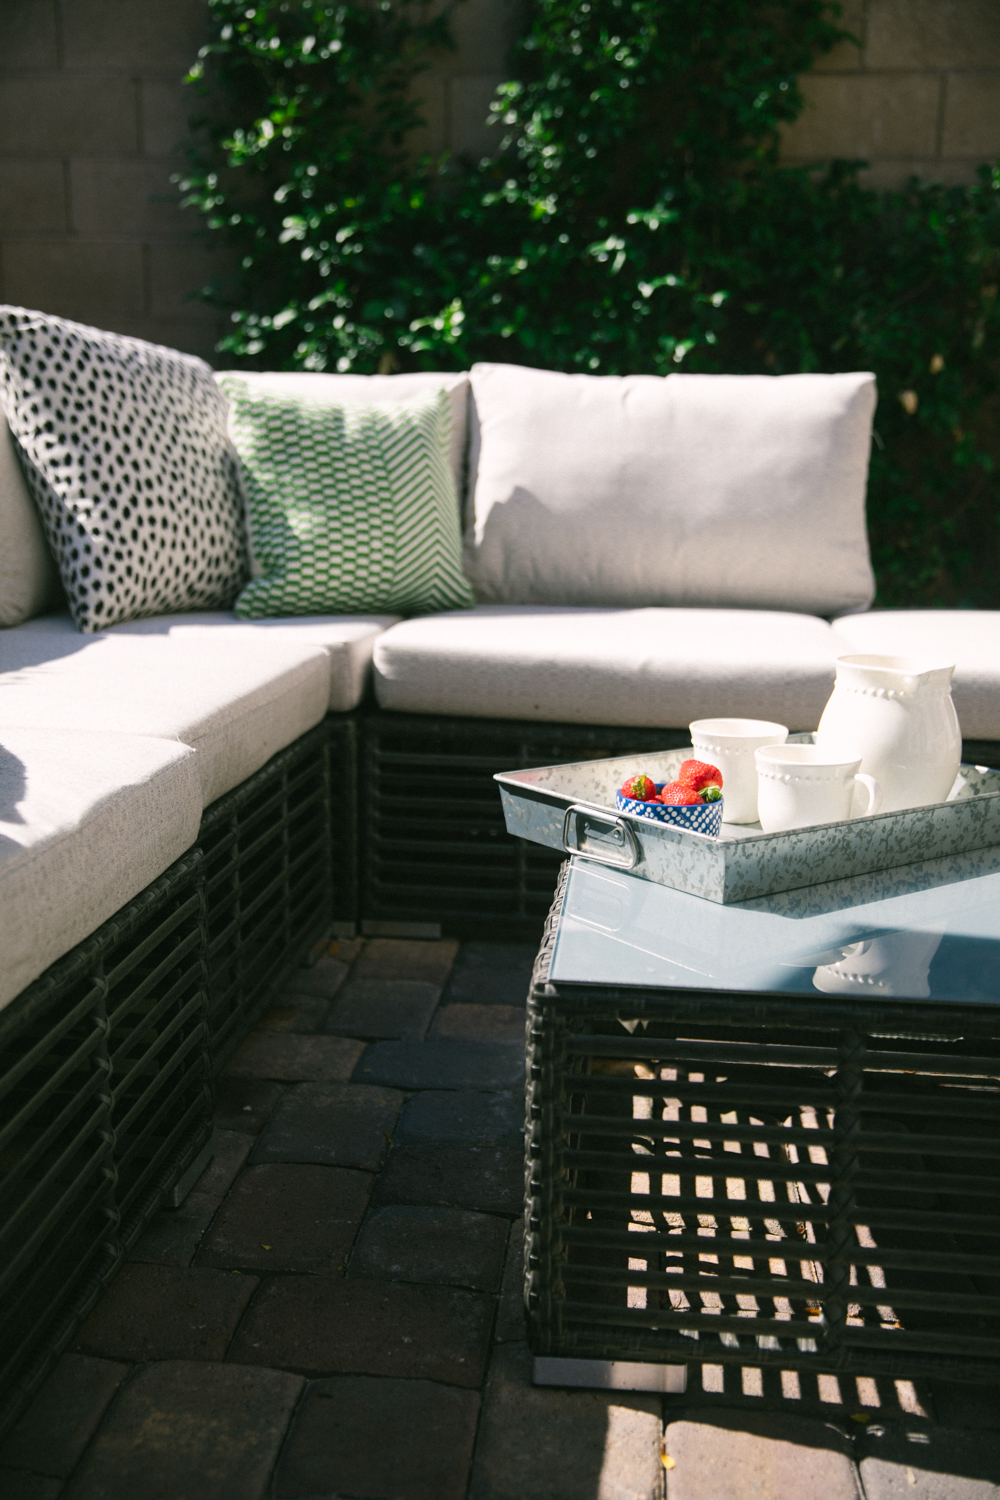 Outdoor Space ideas featured by popular Las Vegas life and style blogger, Life of a Sister